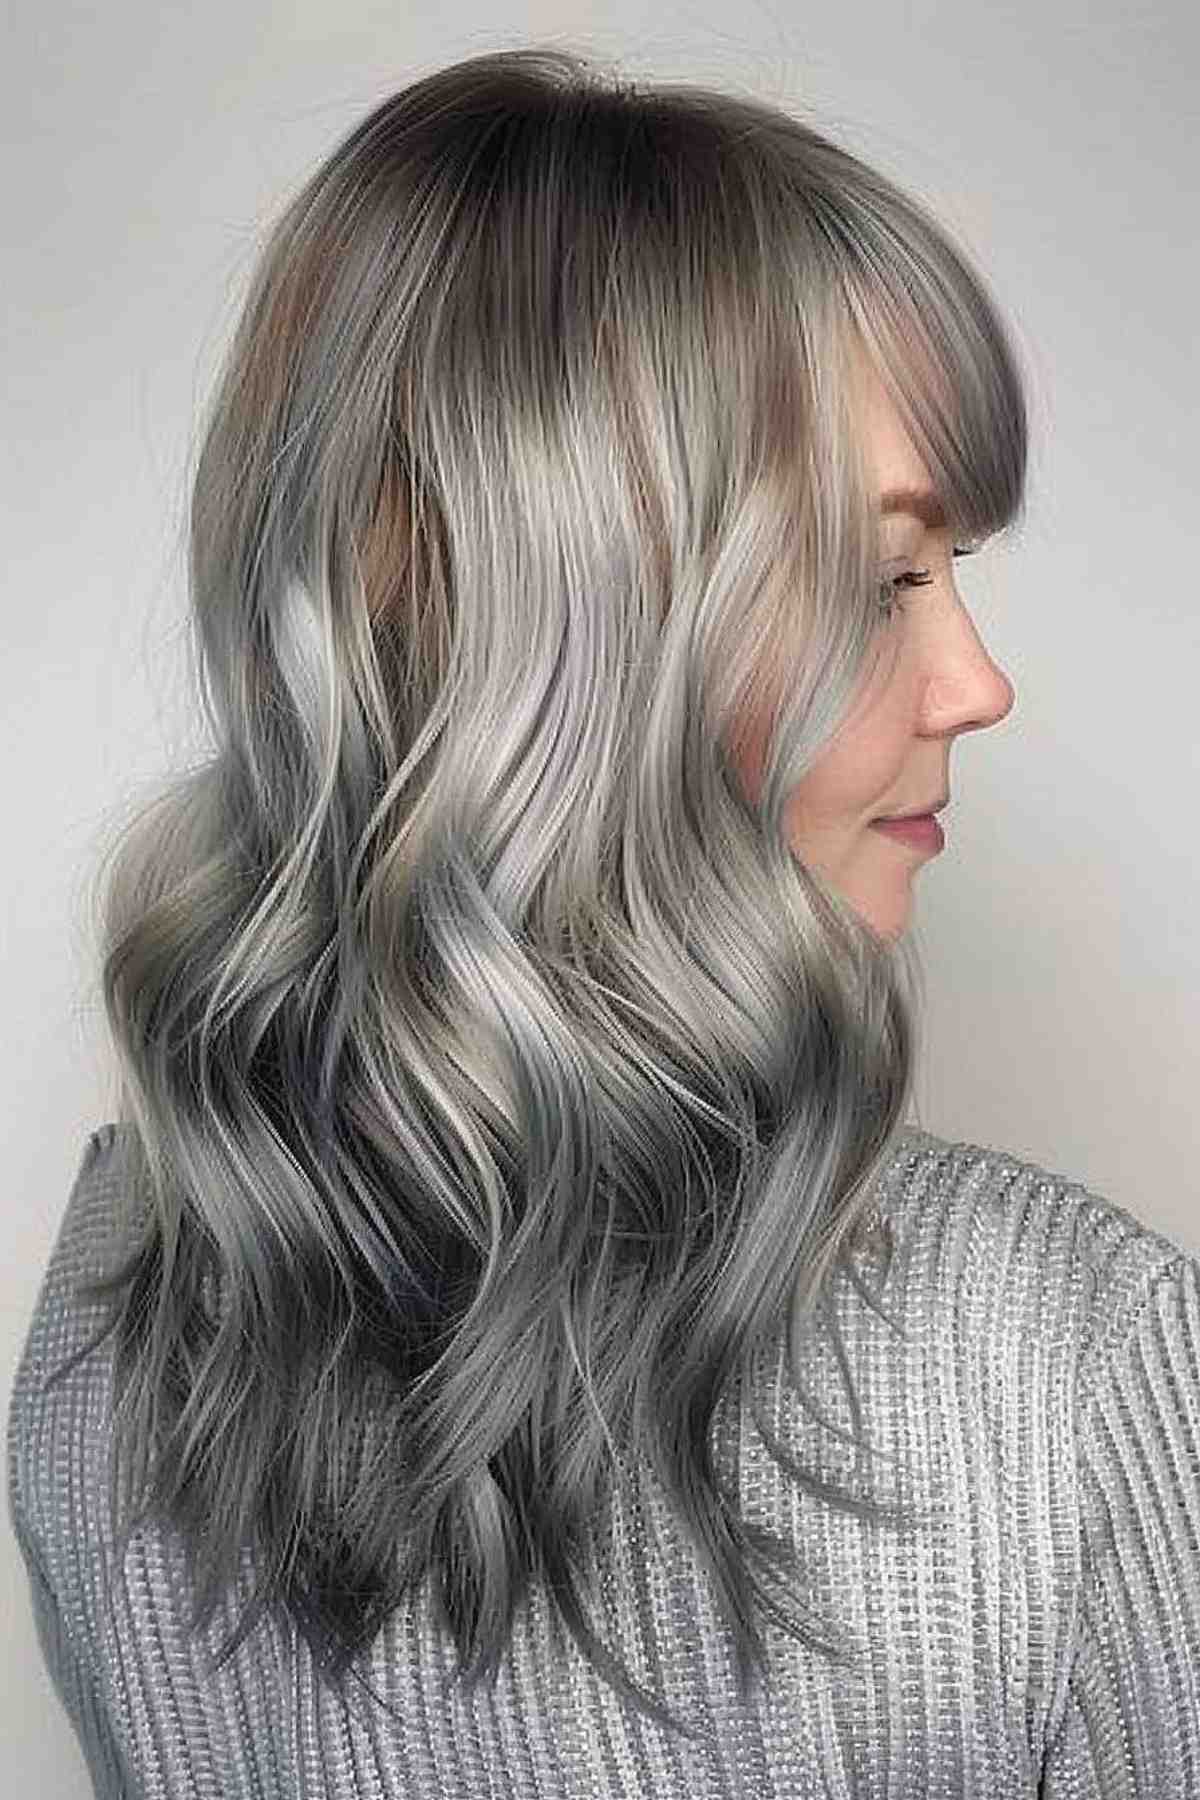 Medium-length silver to dark grey reverse ombre with waves for a voluminous look